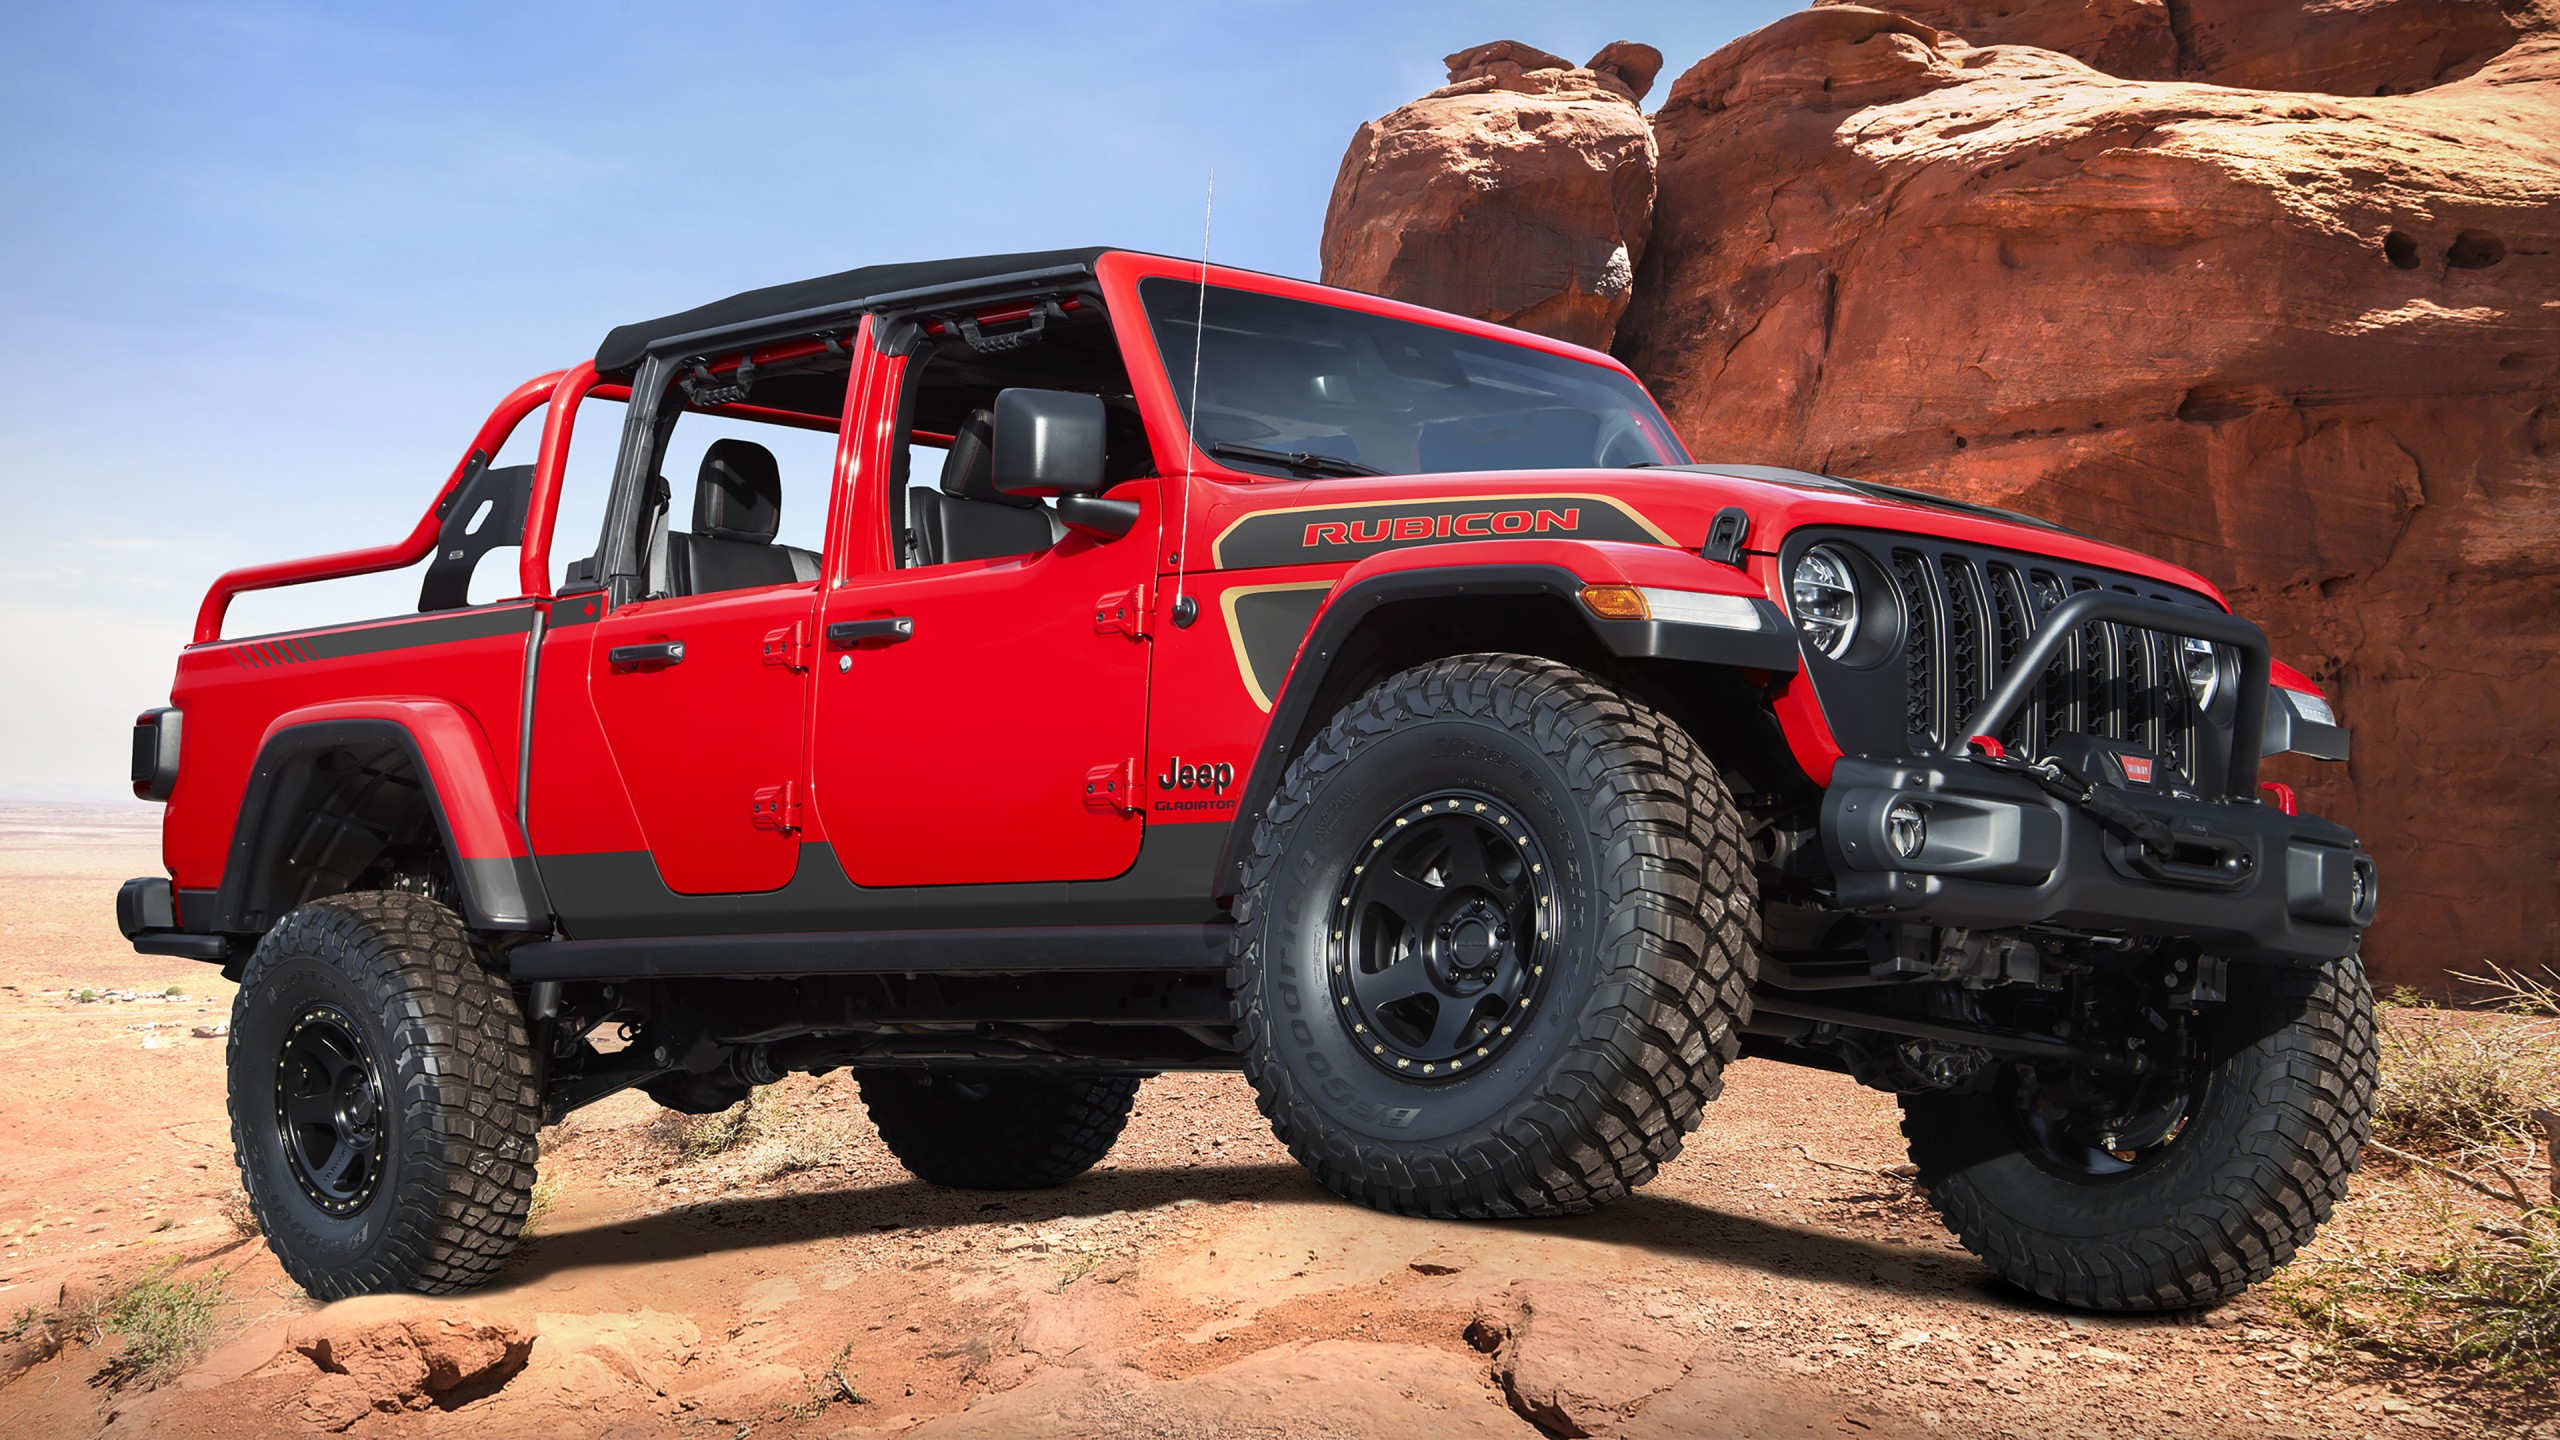 Jeep Red Bare Gladiator Rubicon 2021 4K Wallpaper | HD Car Wallpapers